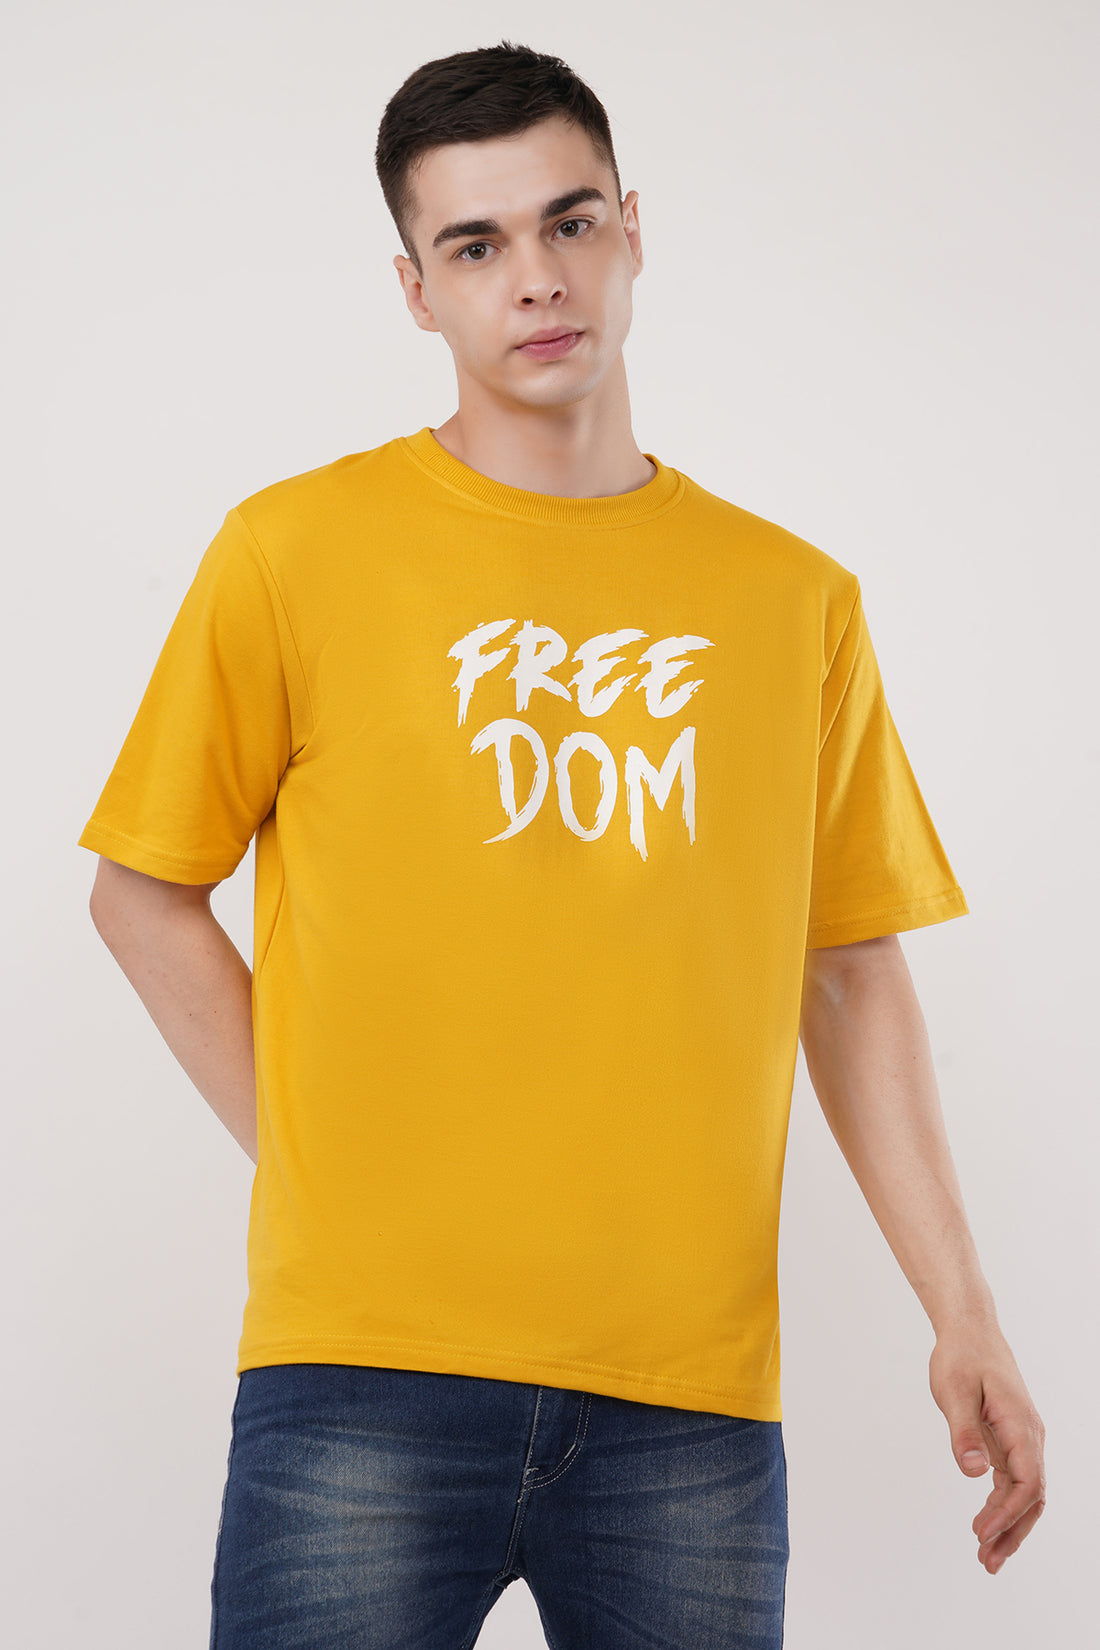 Freedom Roundneck Half Sleeve Obersized T-Shirt in Multiple Prints